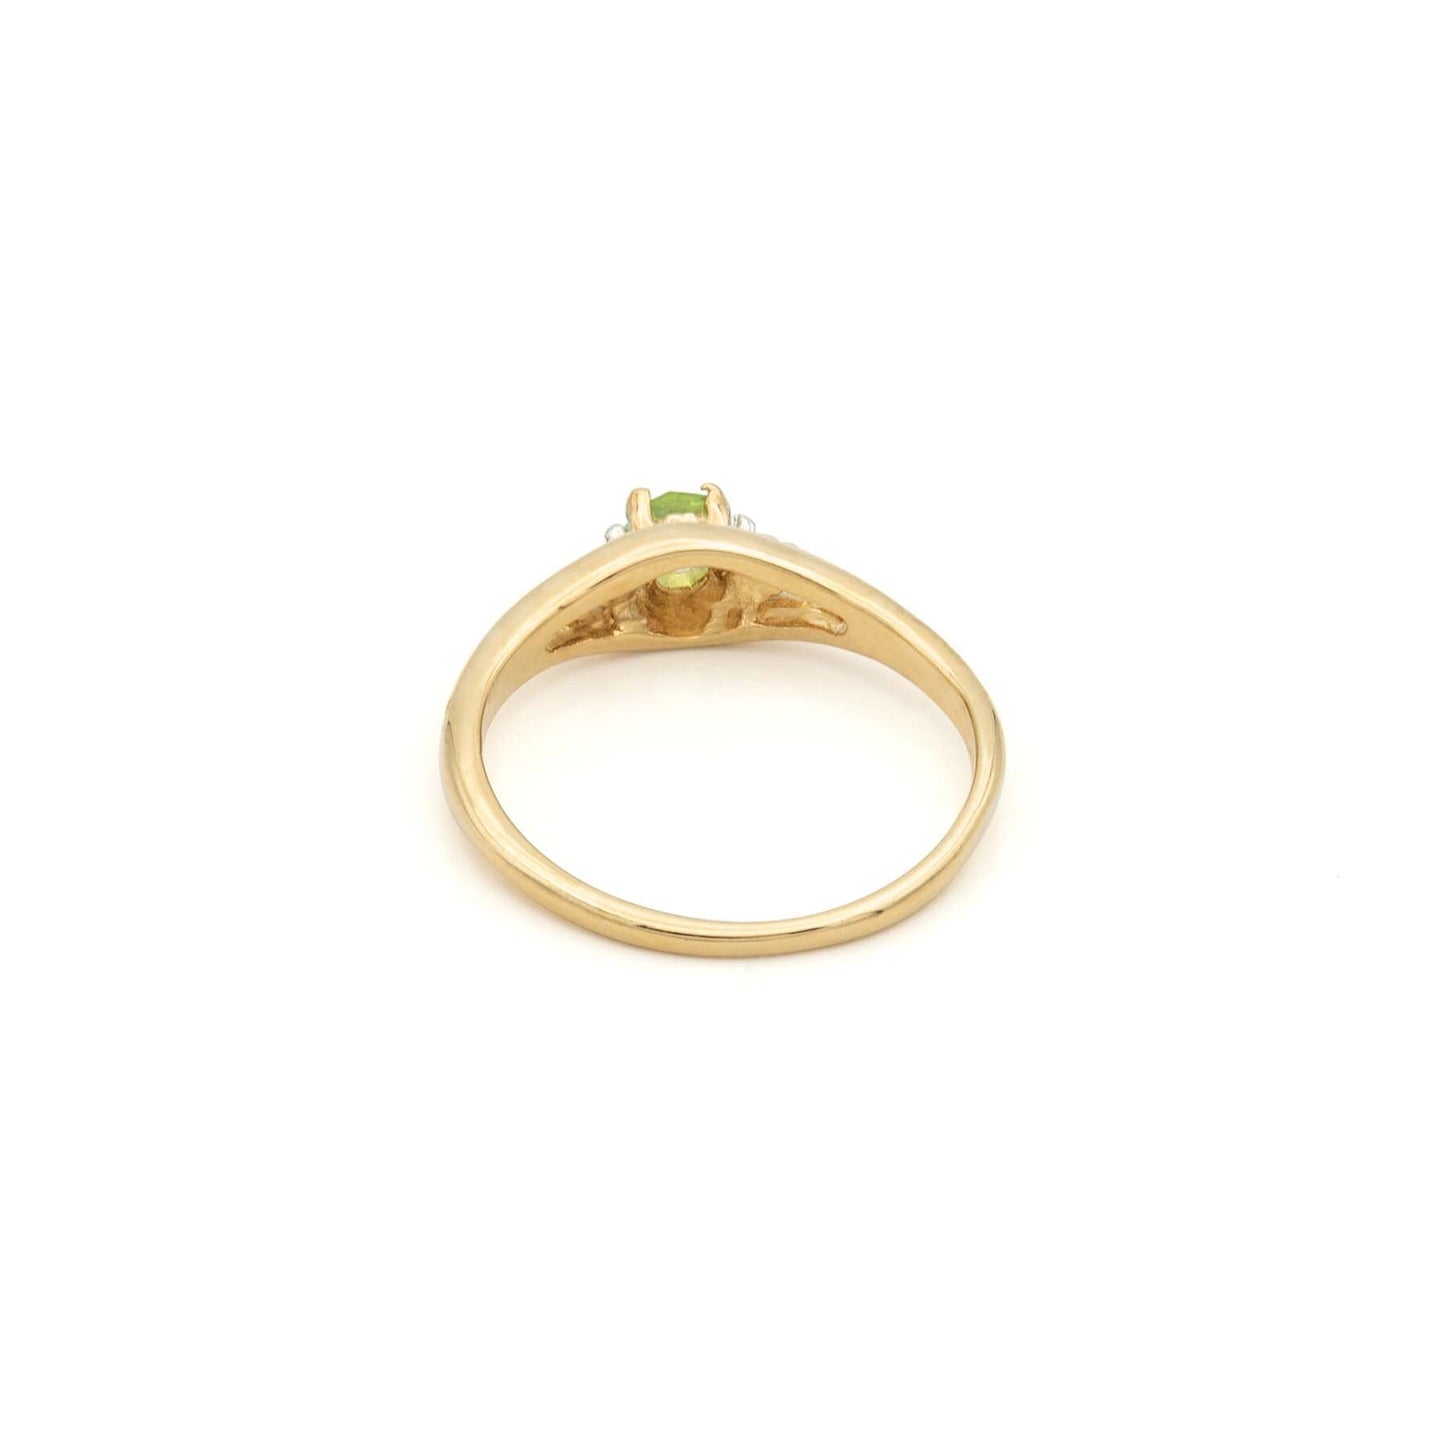 Vintage Peridot and Clear Austrian Crystals 18k Gold Ring Made in the USA R2891 - Limited Stock - Never Worn